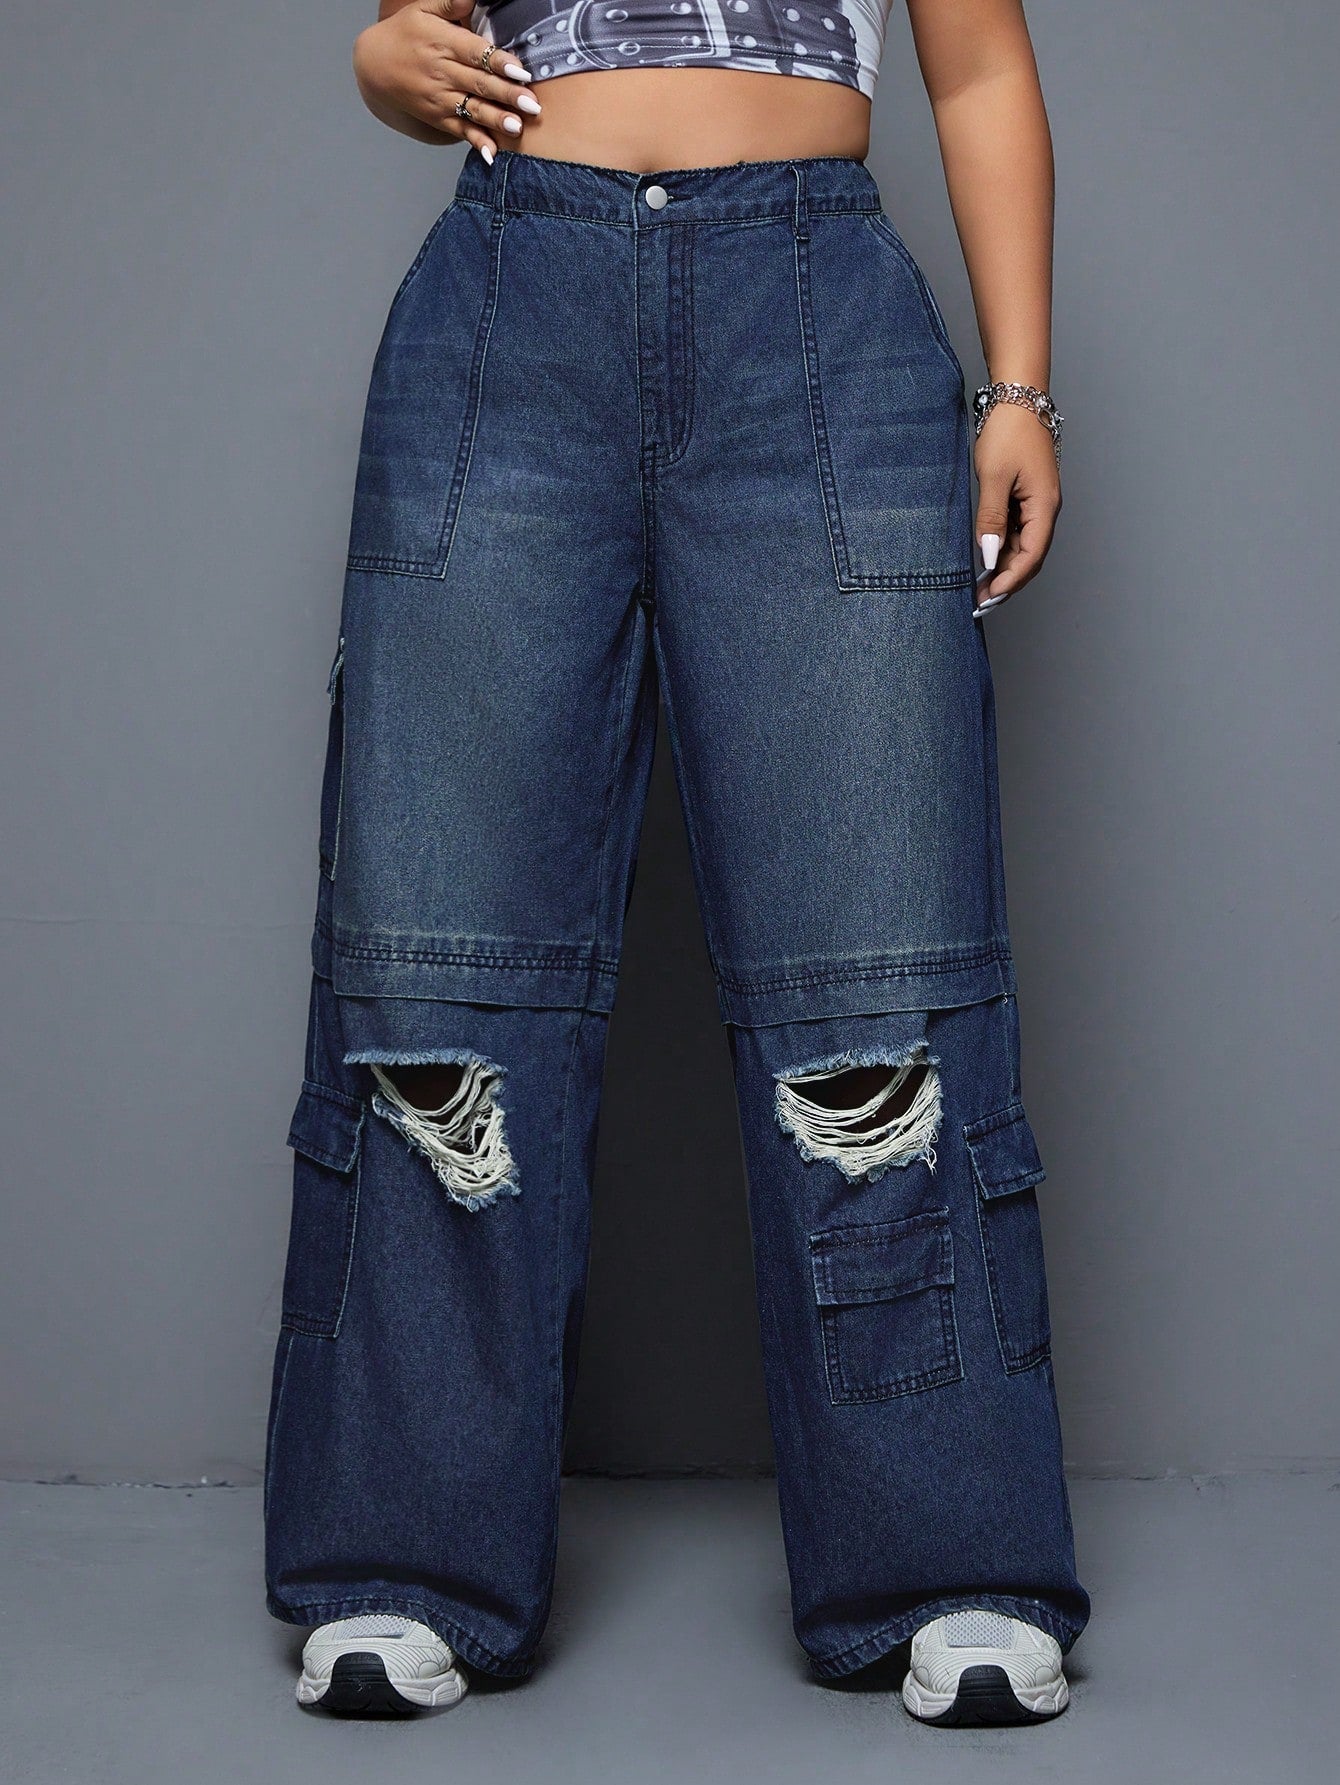 Plus Size Ripped Hole Design Cargo Jeans